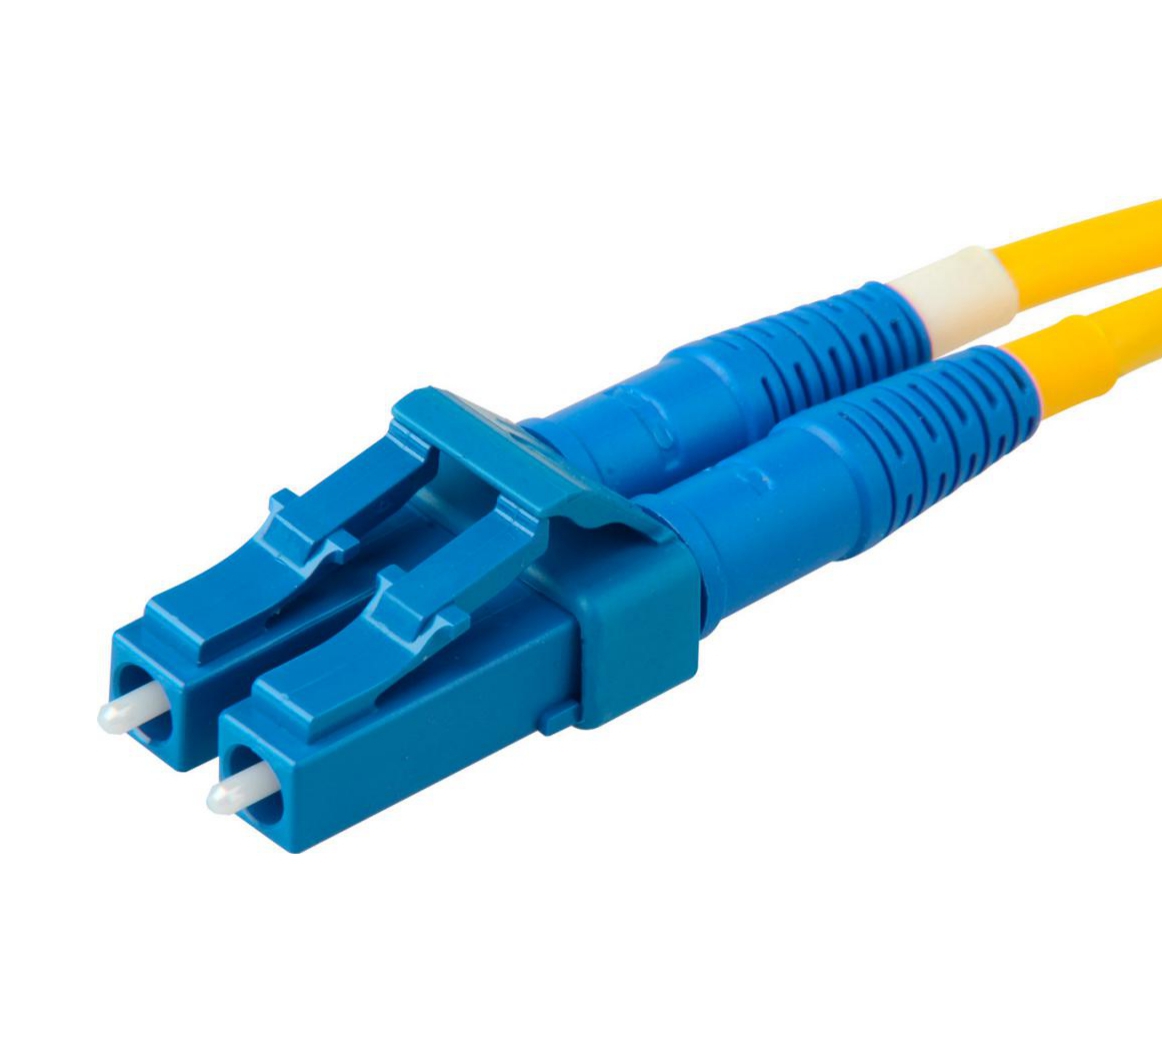 What is LC Fiber Connector?